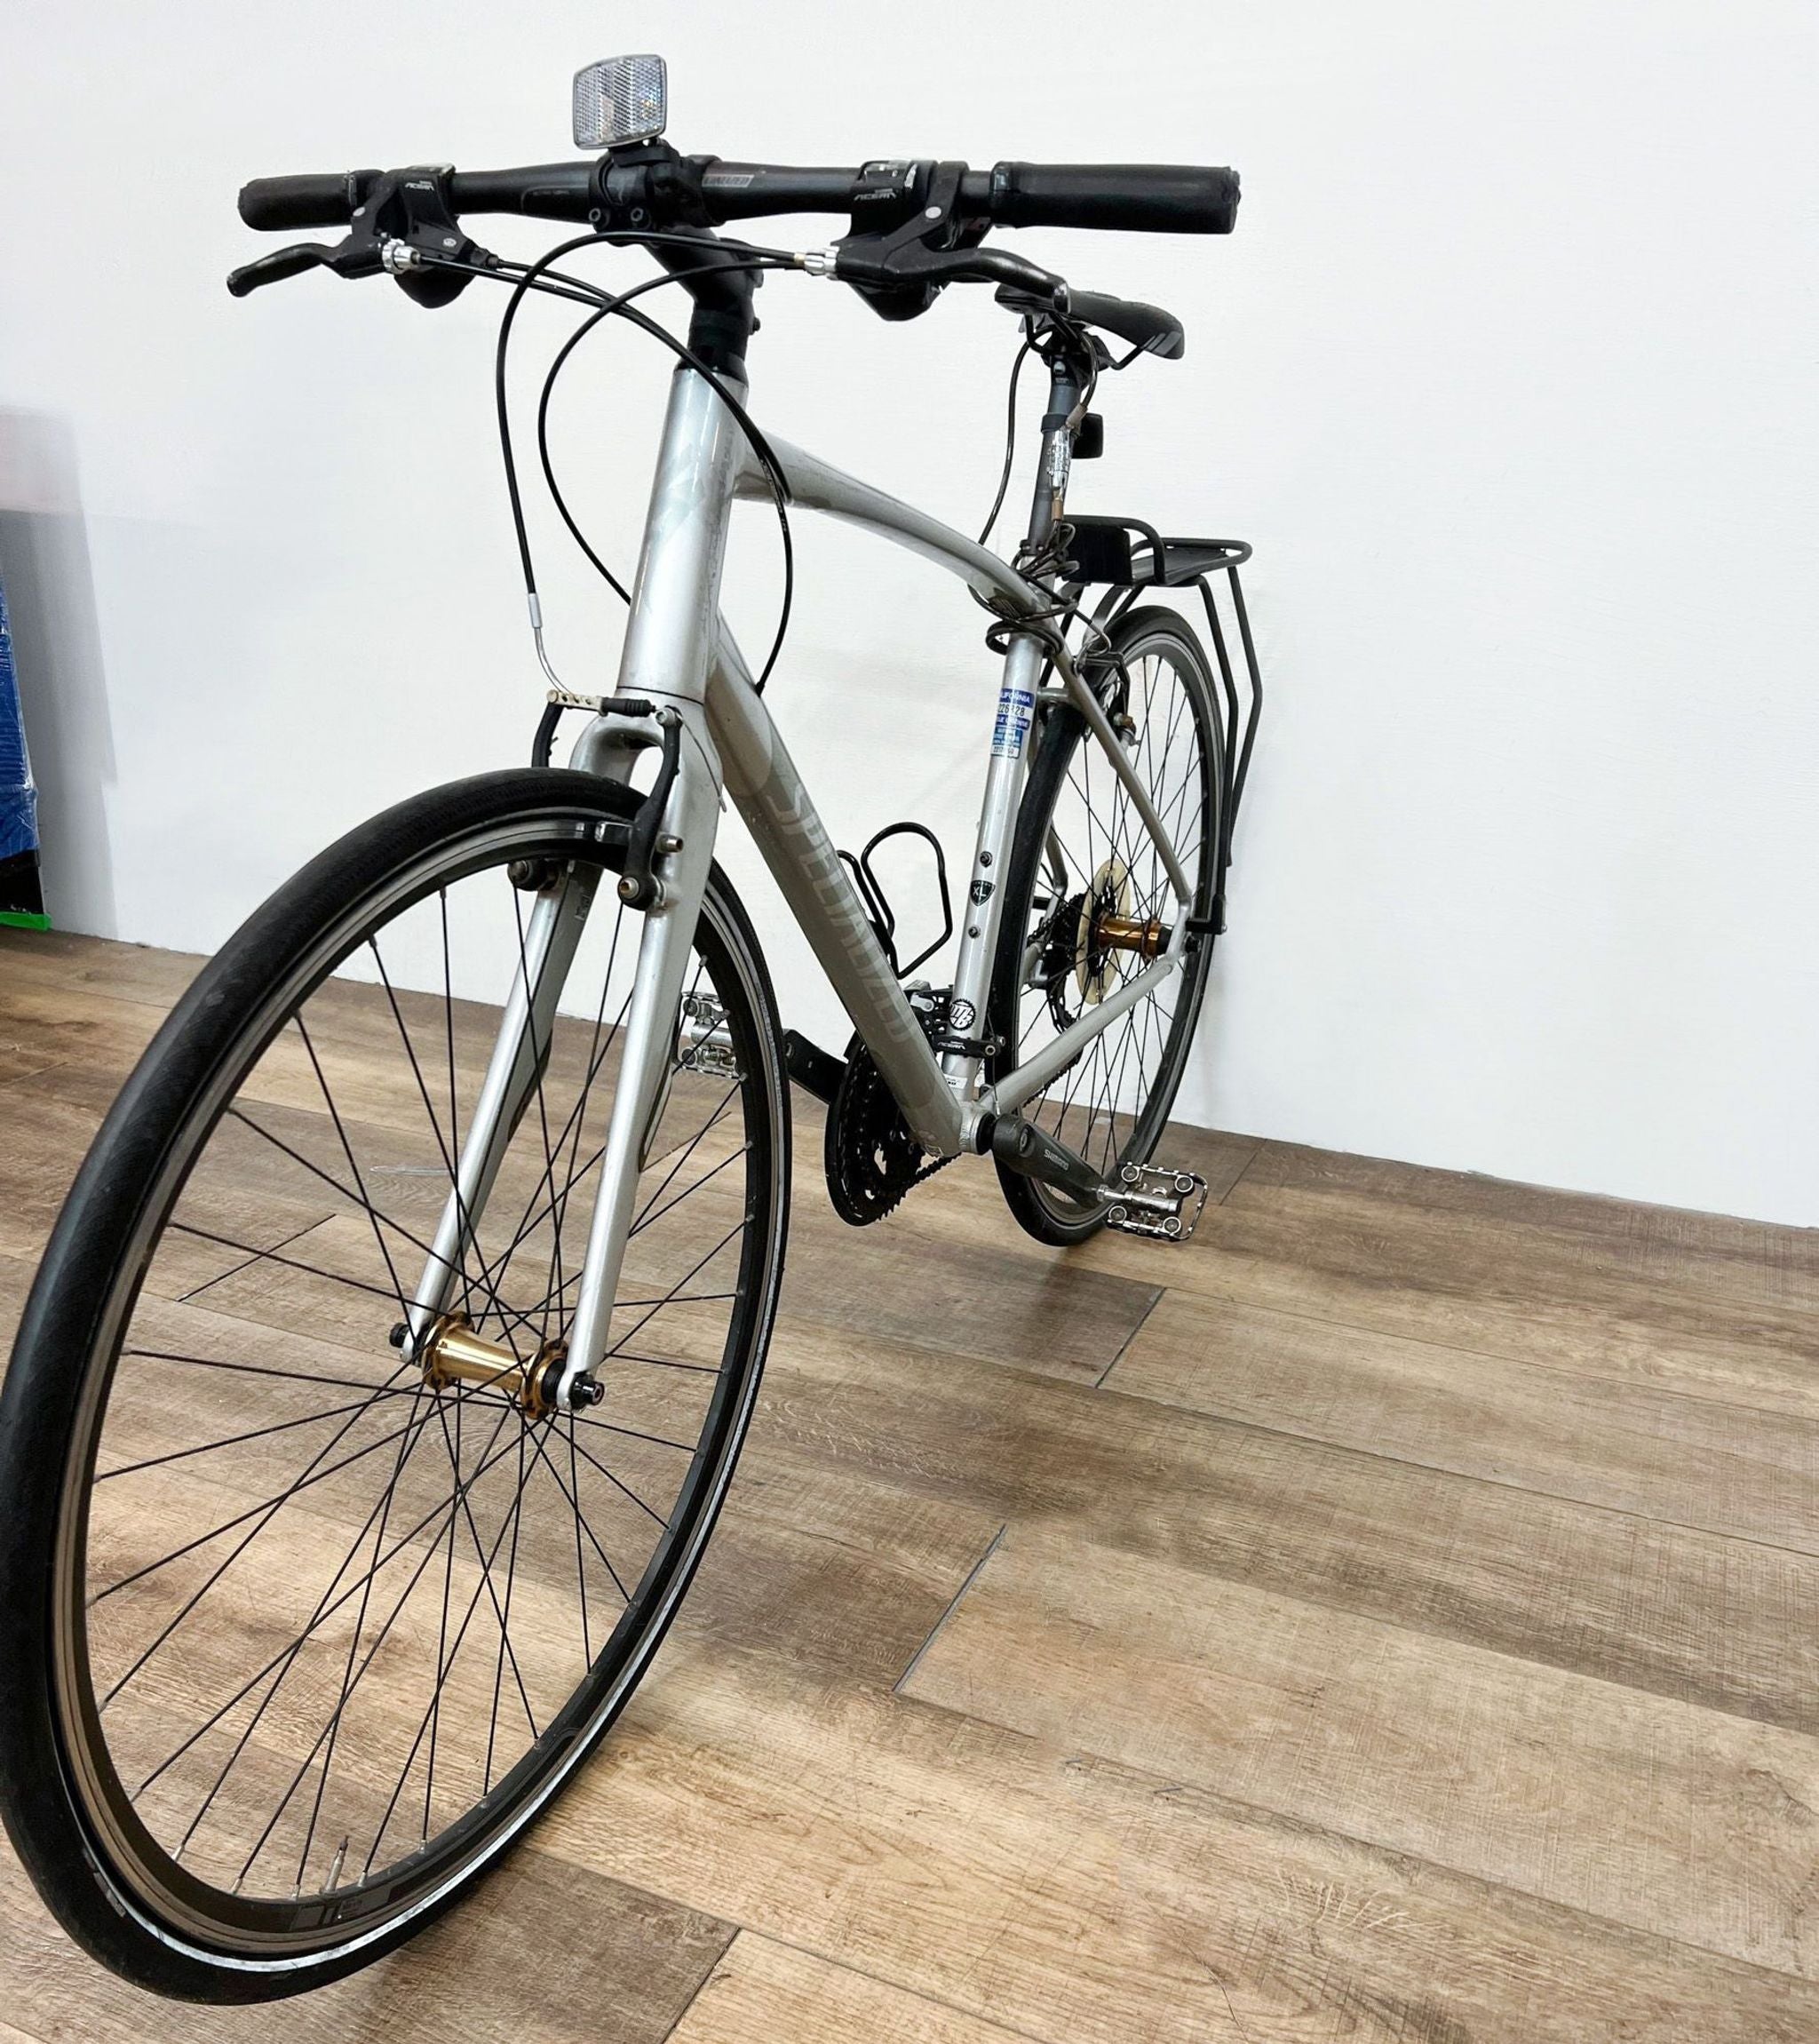 Lightweight Specialized commuter bike with durable aluminum frame, ideal for urban terrain.